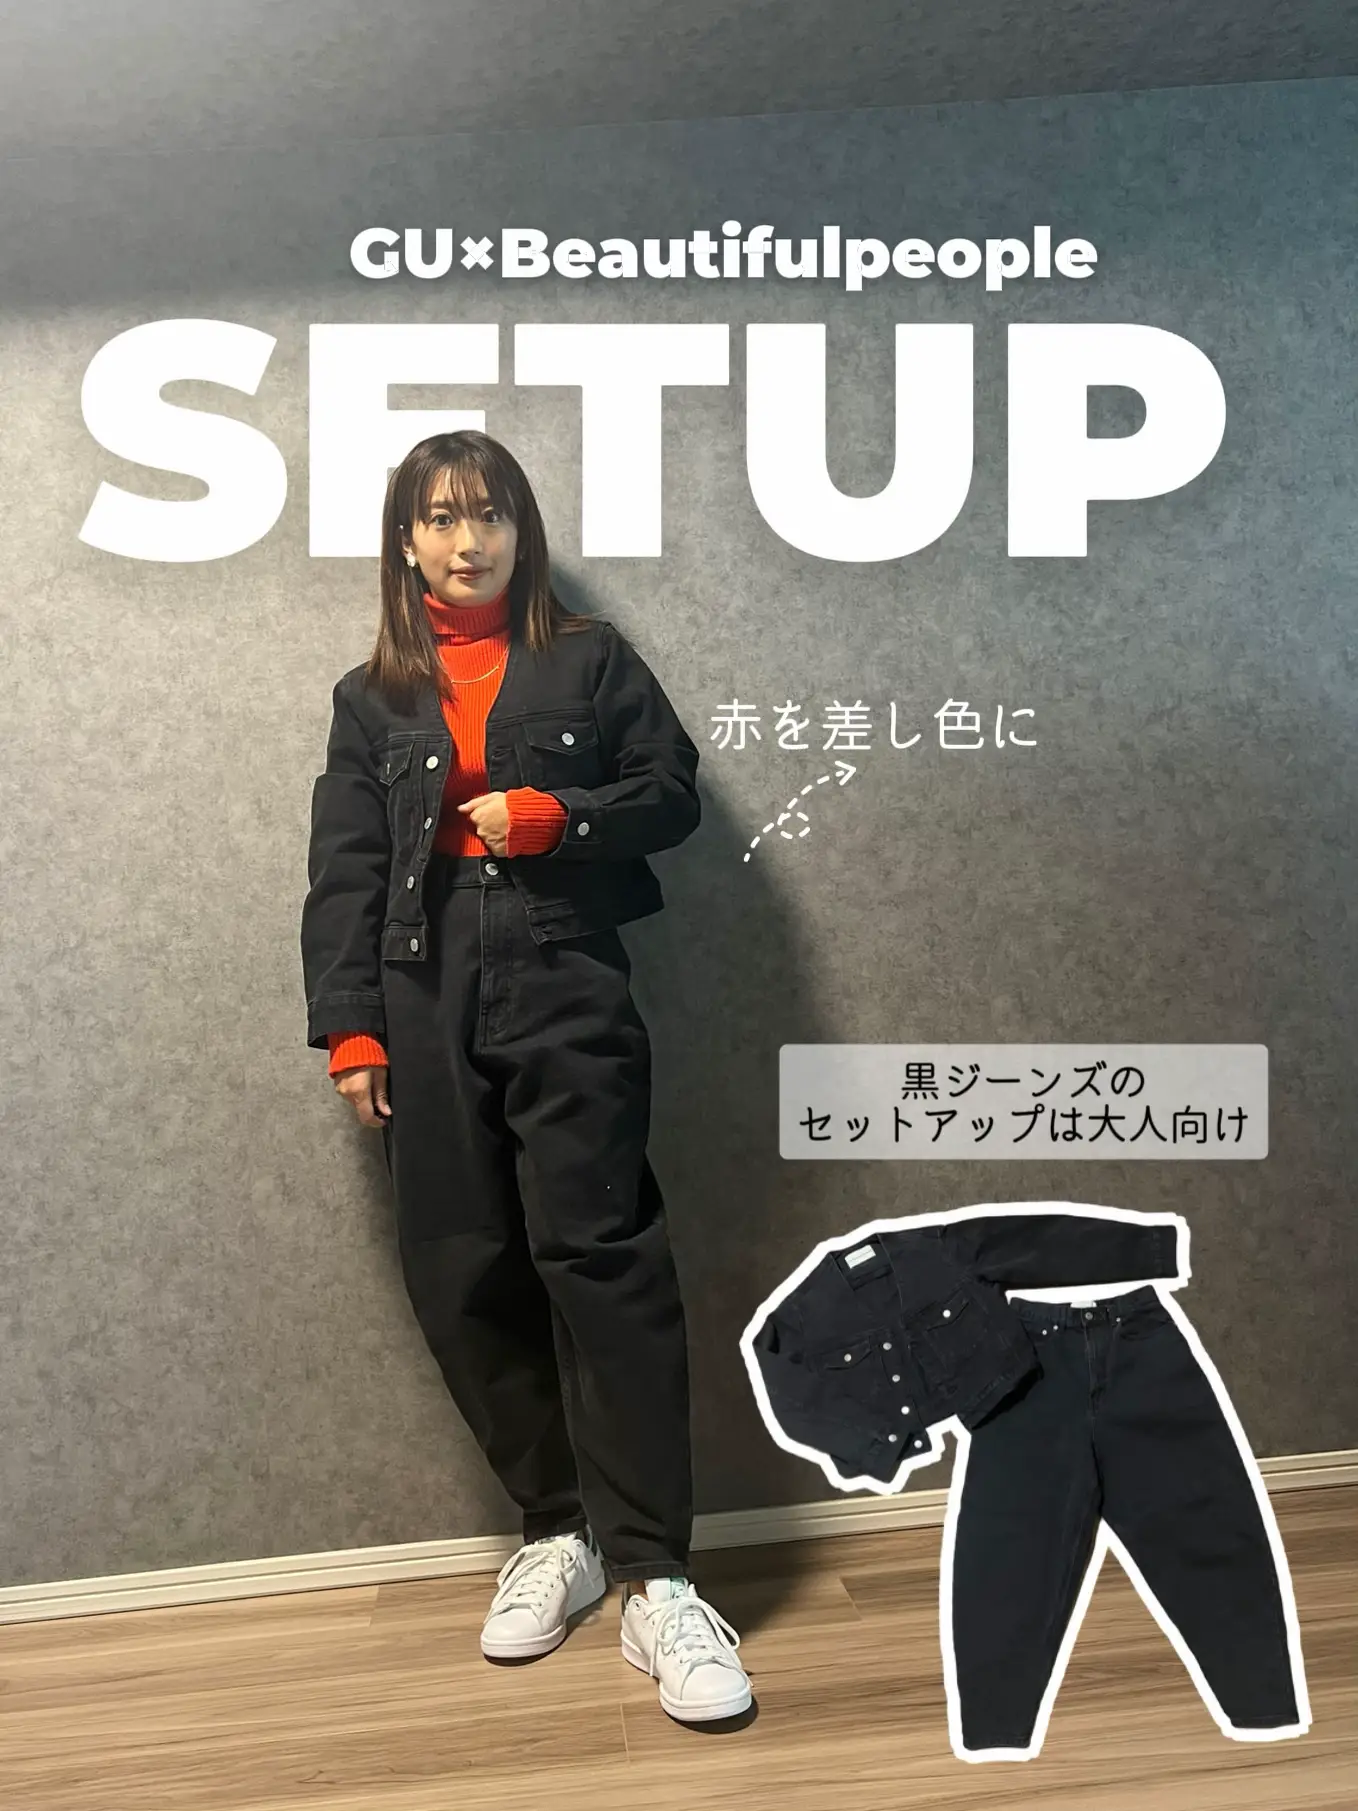 GU × beautiful people collaboration wearing 4 selections from